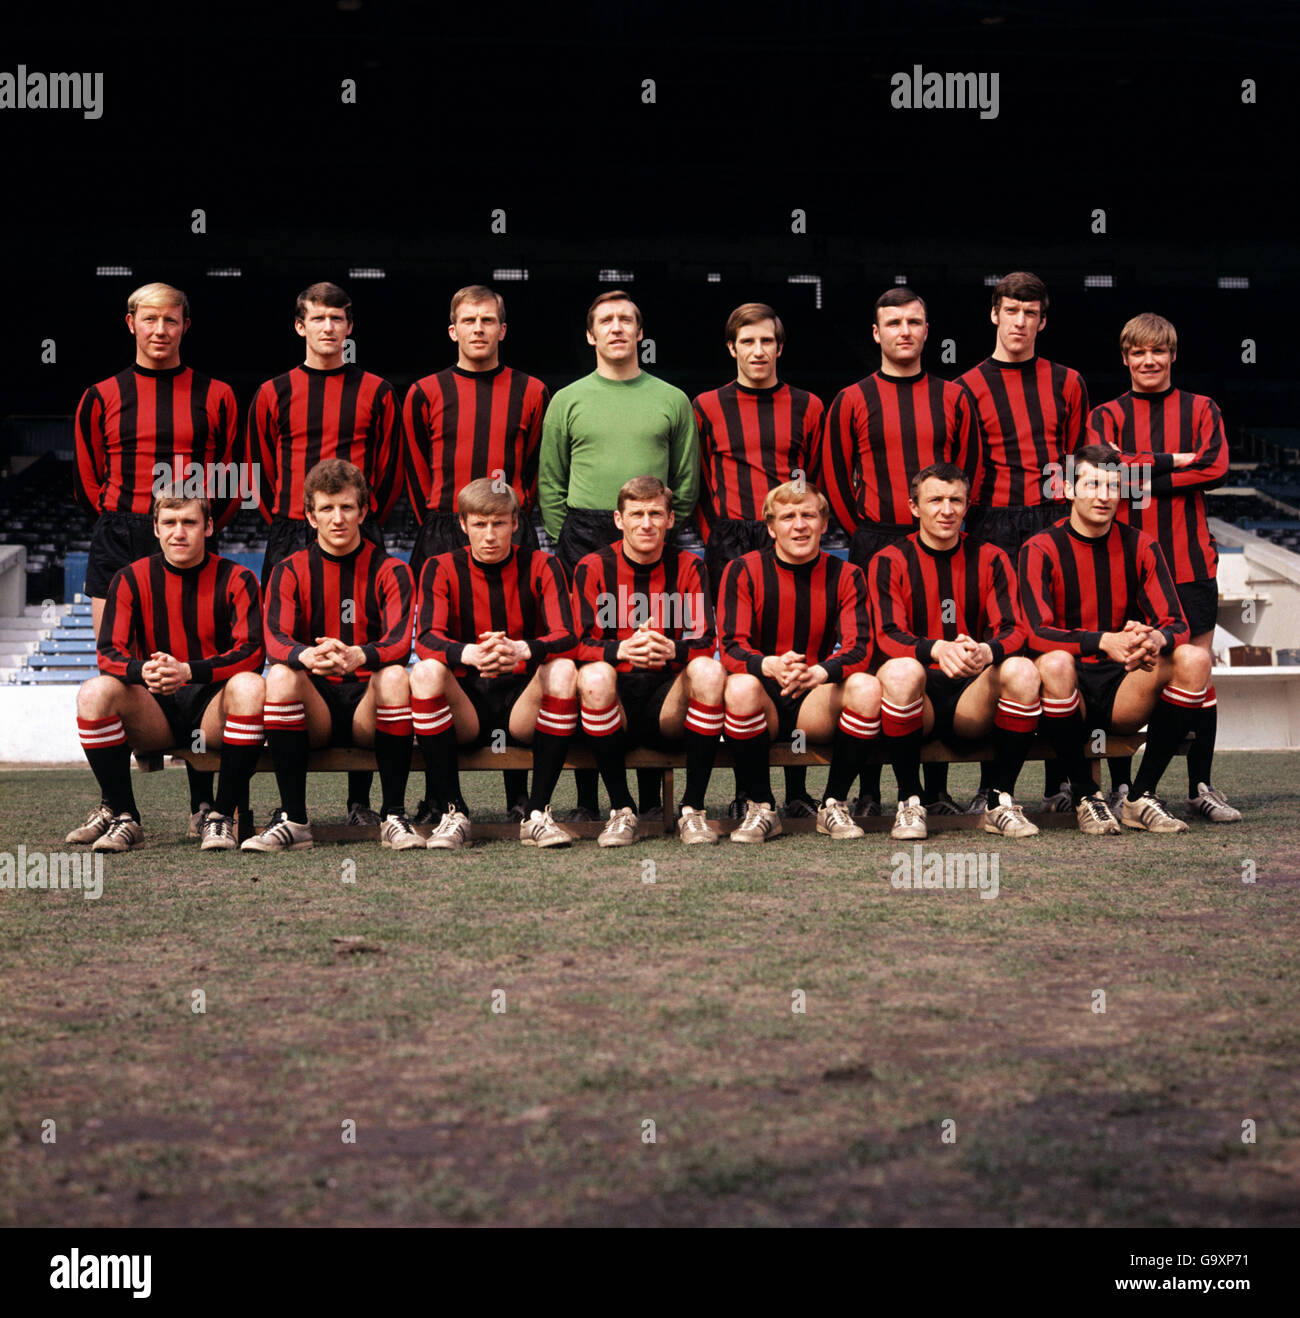 Back row, (left to right): George Helsop, Mike Doyle, Alan Oakes, Harry Dowd, Arthur Mann, Glyn Pardoe, Tommy Booth and Tony Coleman. Front row (left to right): David Connor, Bobby Owen, Colin Bell, Tony Book, Francis Lee, Mike Summerbee and Neil Young. April 1969 Stock Photo